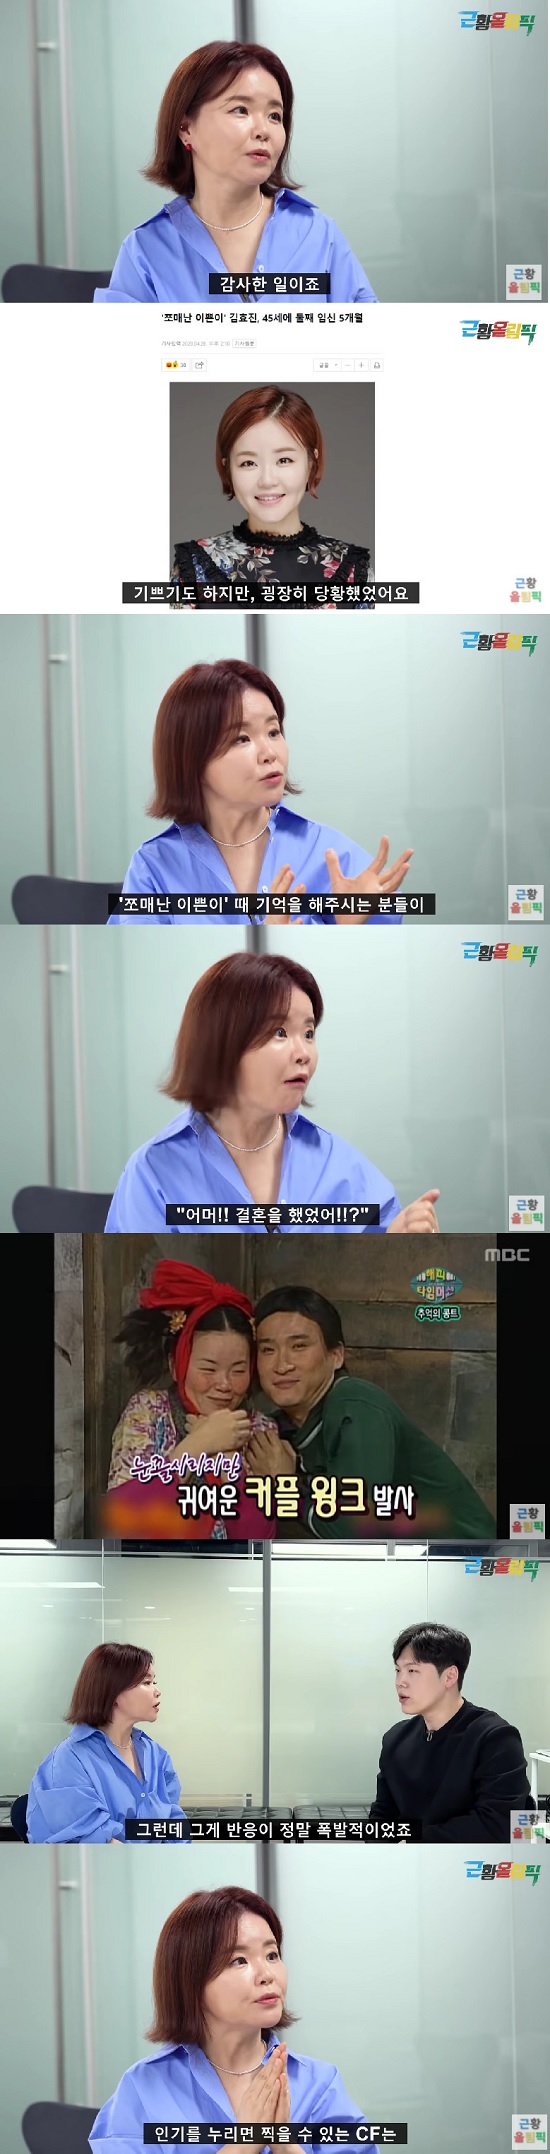 On the 31st, Recent Olympics YouTube channel, Gag Woman who was nationwide .. Wool Mom and Non-stopIn the video, Kim Hyo-jin said that he was living as a mother of two children at the age of 45 two years ago. I am glad that the second one was suddenly like a gift, but I was very embarrassed.Im healthy and I love each other a lot, he said.Kim Hyo-jin said, If you remember those who remember when you are a sweet girl, you are very surprised to see people in a mart or a market or something like this. My mother was married?He responded, he said.Kim Hyo-jin, who had been loved by a pretty character who appeared in the corner of Wool Mom on Good Day, recalled the corner, saying, I pretended to be a pretty little girl who was ugly and ugly.Kim Hyo-jin said, Unexpectedly, many people are so cute and funny, and now it is fixed.I told him to try to blink Seo Kyung-seok and me (the PD at the time) in line with the music.At first, Seo Kyung-seok and I suddenly came out of the music, blinking my eyes, and I wanted to be a little strange. But the reaction was really explosive, he recalled.When asked about the Rookie of the Year, Excellence Prize, and Grand Prize at various awards ceremony at the age of 22, Kim Hyo-jin said, I think I have almost taken a CF that I can take when I enjoy popularity. I started with electronic products and took haggas debt, confectionery, baking, ice cream, etc. I was able to do my parents house in my early 20s and I was able to buy my house, he said. You can think that then I will be enormous now.Referring to his appearance in the Non-Stop, Kim Hyo-jin said, In fact, it was the story of the early years of the company at the beginning of the Non-Stop.Unfortunately, the ratings were low and the reorganization was made again, New Non-stop.Jo In-sung, Jang Na-ra, and Lee Ji-nis teen stars will be in front of the main character, and I will be cast as a licorice role and assistant role.I am so grateful now, he said. At that time, I was loved by a lot of beautiful and started with the lead role at first, but I want to act as a licorice to be pushed to the supporting role.I am only 3 to 4 years old with my Friends, but suddenly I feel older, and my mind was a little slumped. Kim Hyo-jin said, I am sorry that Park Kyung-lim, Jo In-sung, and Yang Dong-geun have not been able to get along well with these Friends.I was a senior, I was solemn, he said. I do not have a few years difference, but I think I was trying to pretend to be solemn and teach. When I think about it, I really think that I really want to kick a quilt, Why did I do it? Why did I not know I was so grateful?Kim Hyo-jin said, I was constantly broadcasting, but it is true that I can not do it as actively as before.He said that his first child was born, Burnout, and depression came, and that he was saddened to see the coming of the female gag woman era.I was saddened by my own idea that if I did not marry and had no children, if I had been more enterprising to work, I could not have worked together at that edge.Photo: YouTube Channel The Current Olympics